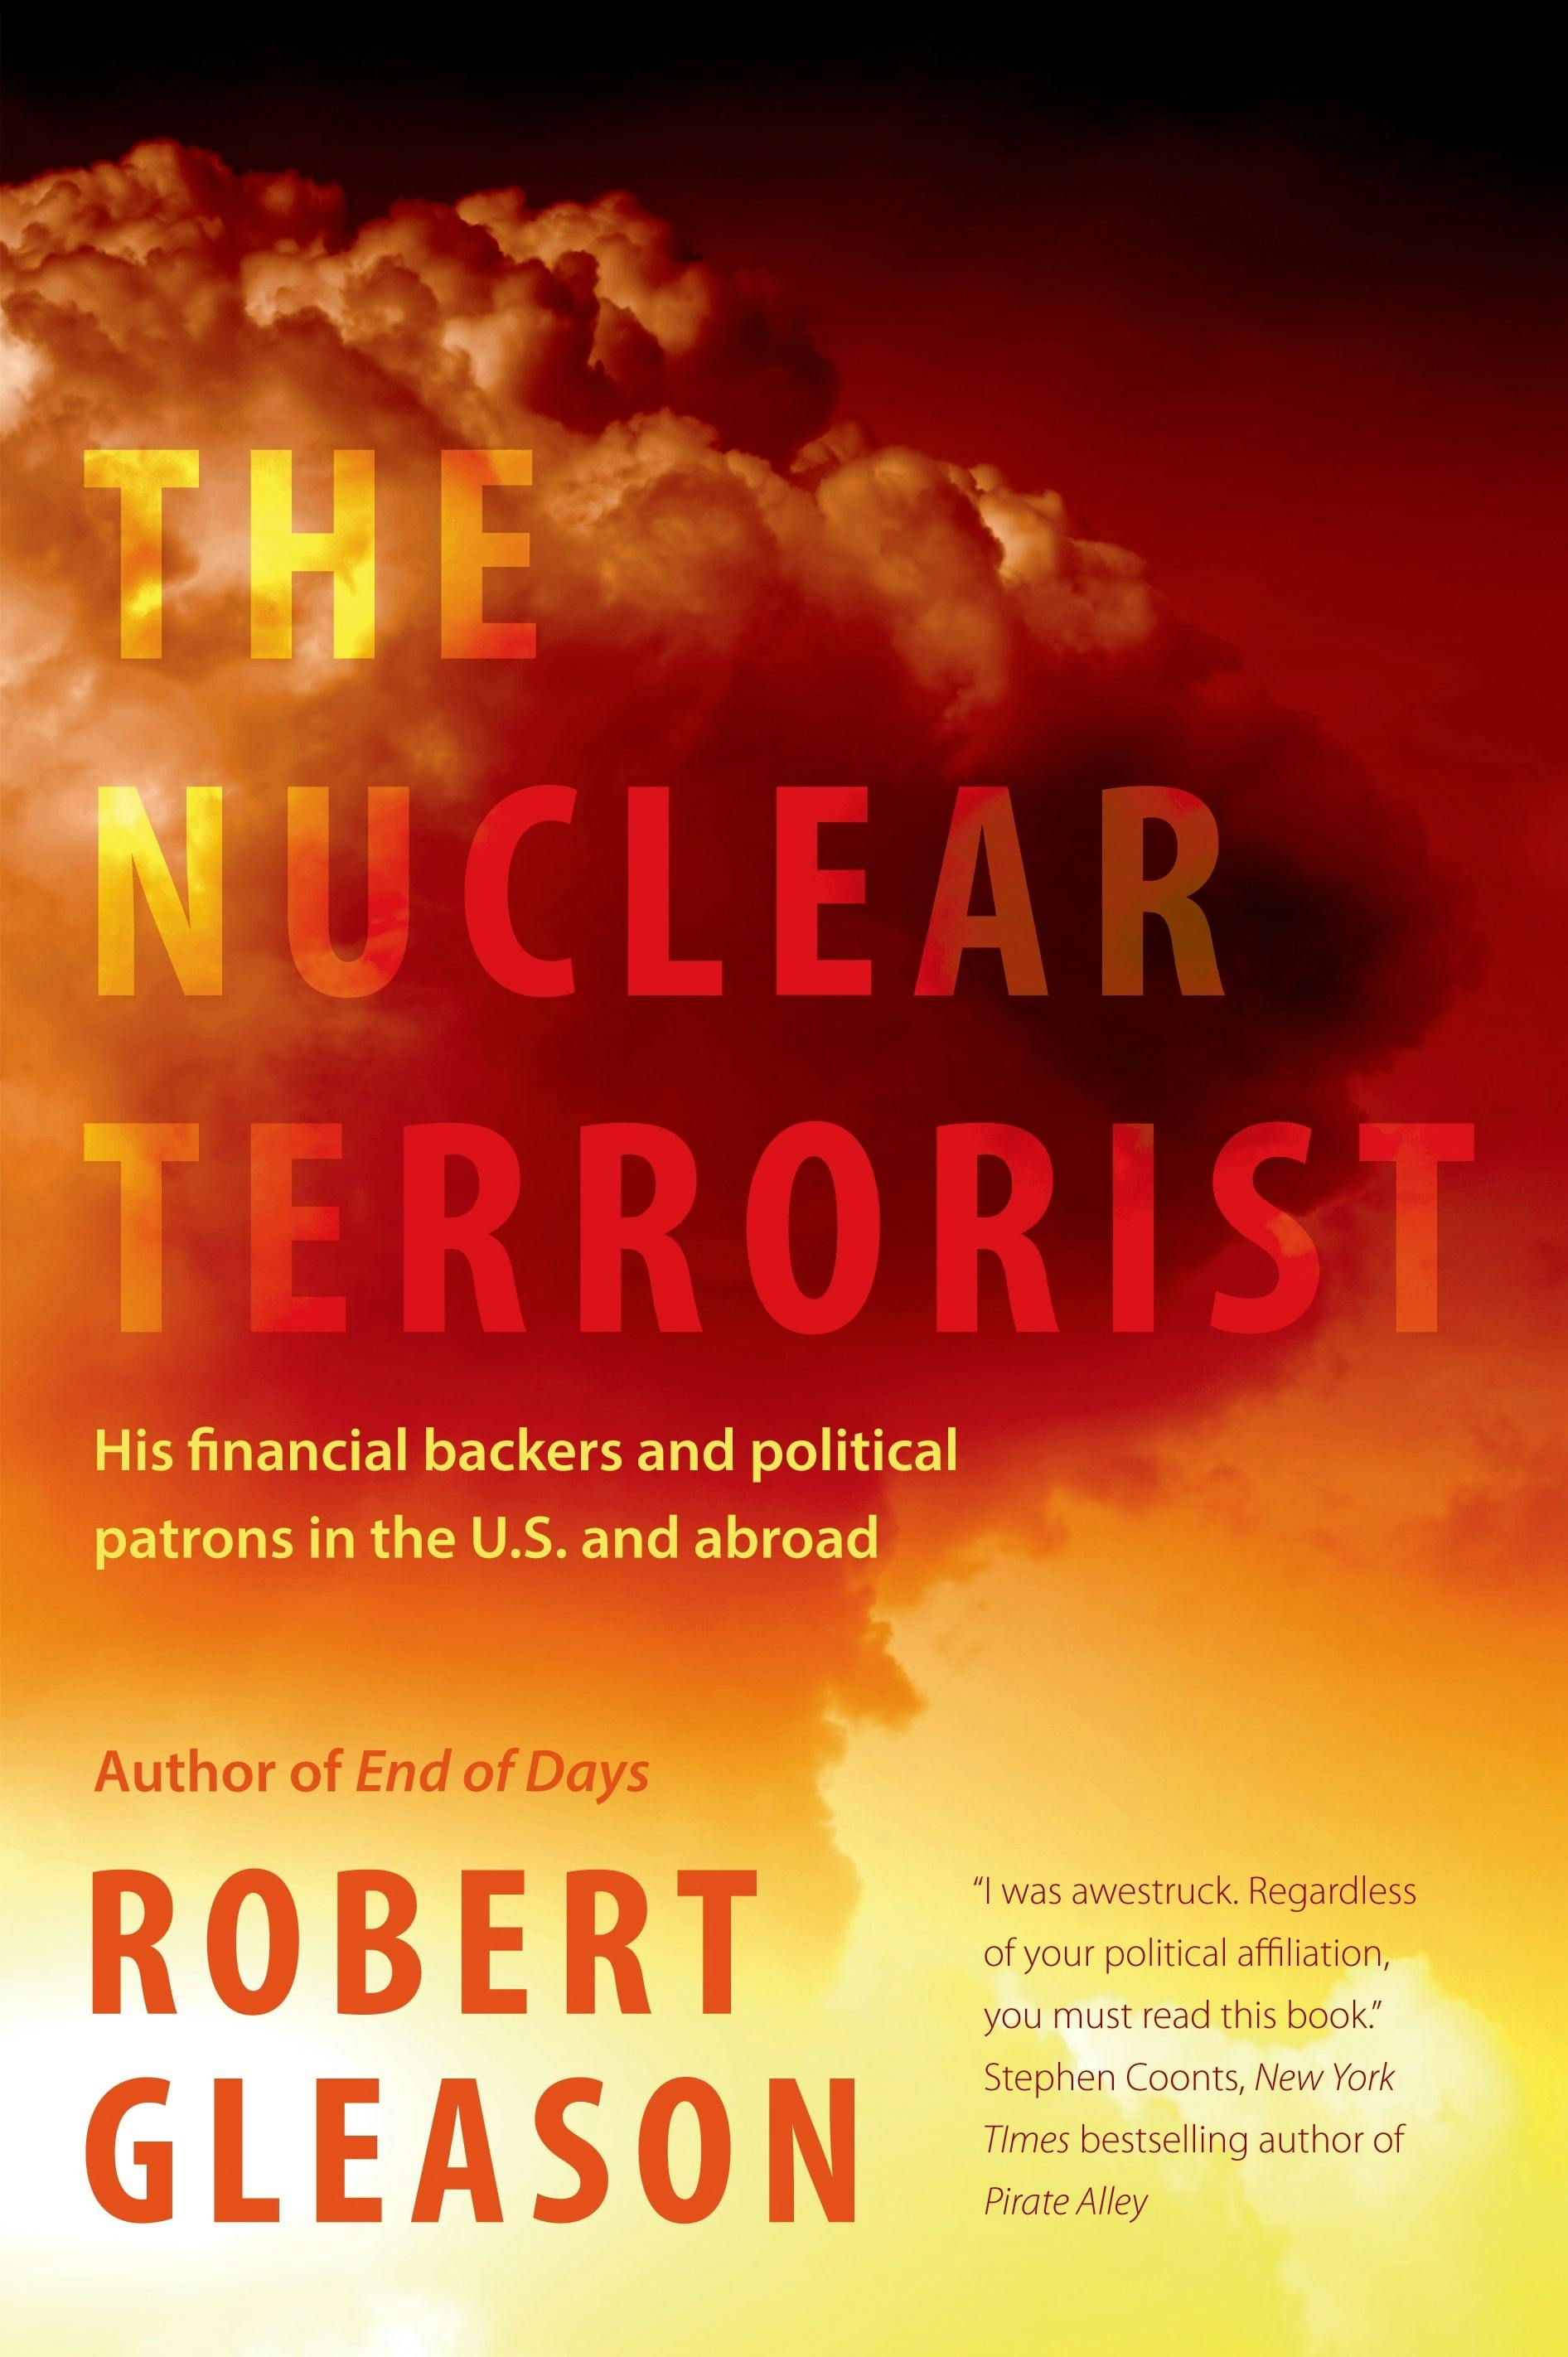 Cover for the book titled as: The Nuclear Terrorist